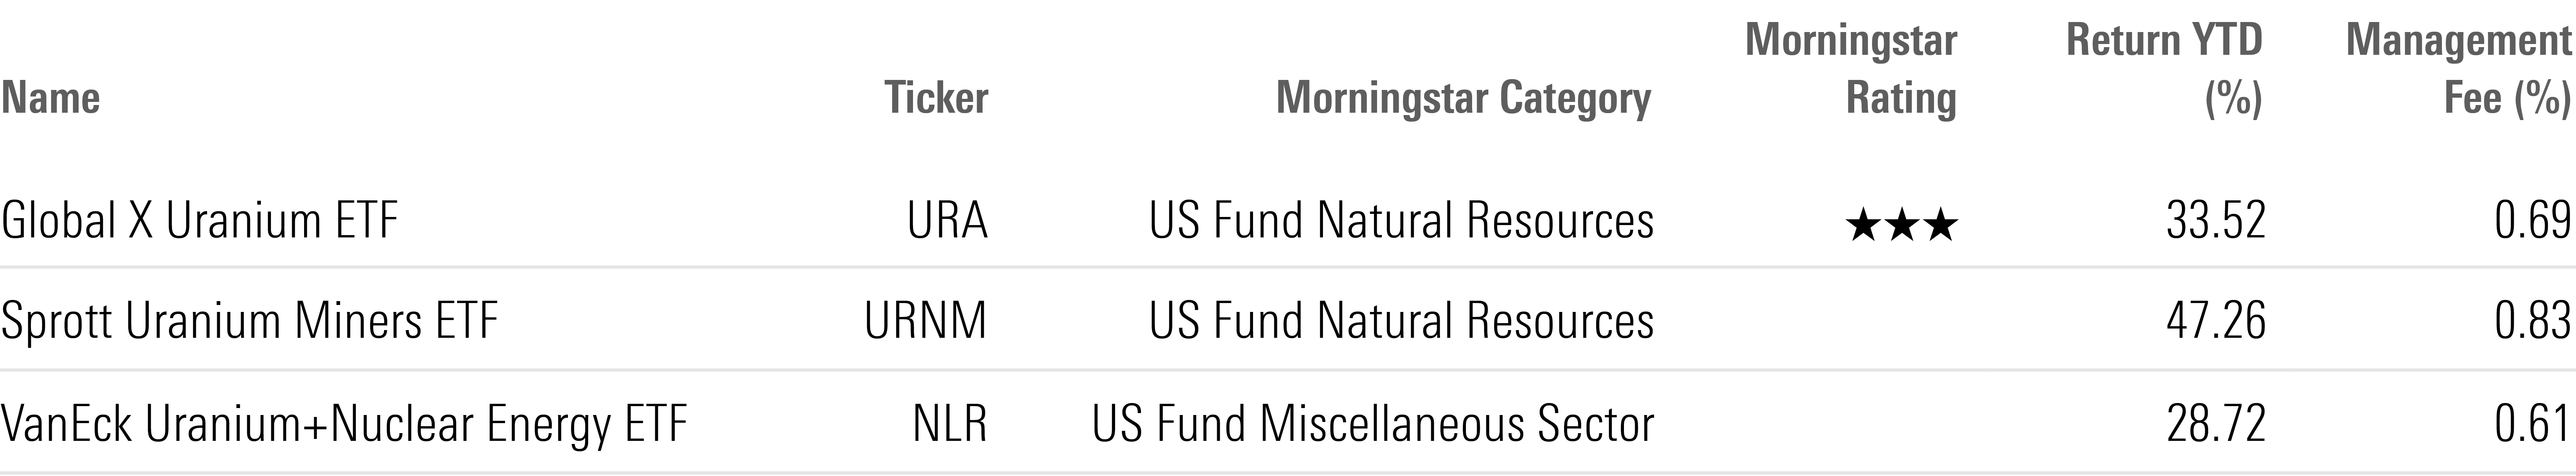 Some Nuclear-Related ETFs